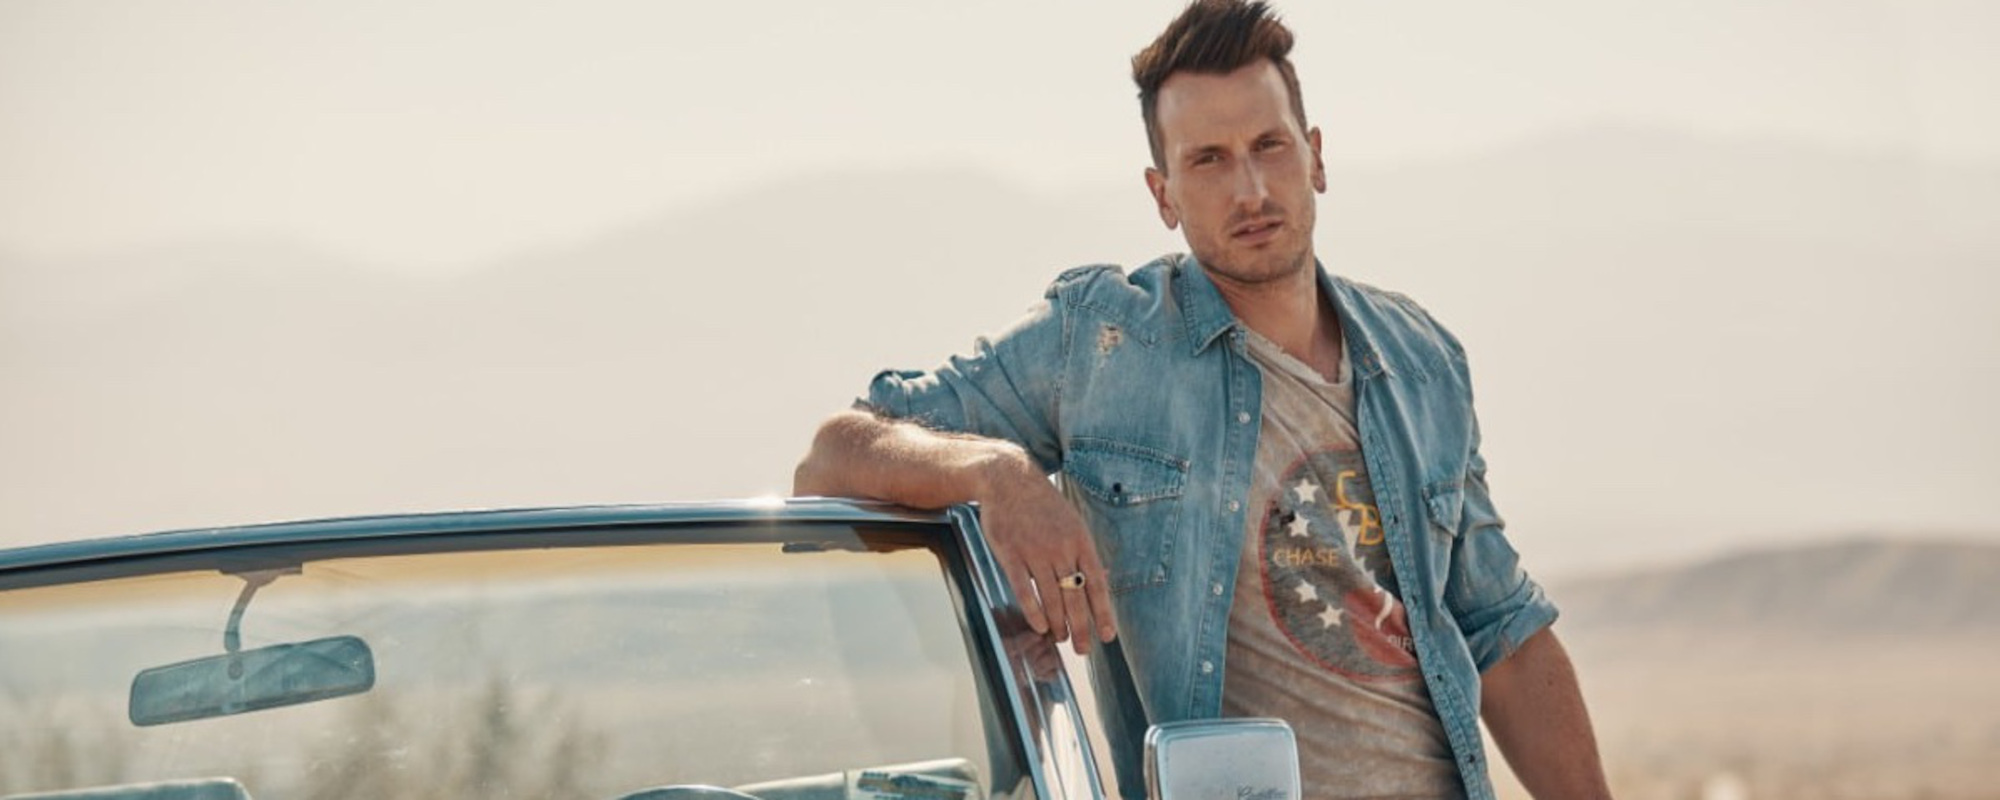 Russell Dickerson Sells Out the Ryman: “I Just Never Want This Night To End”